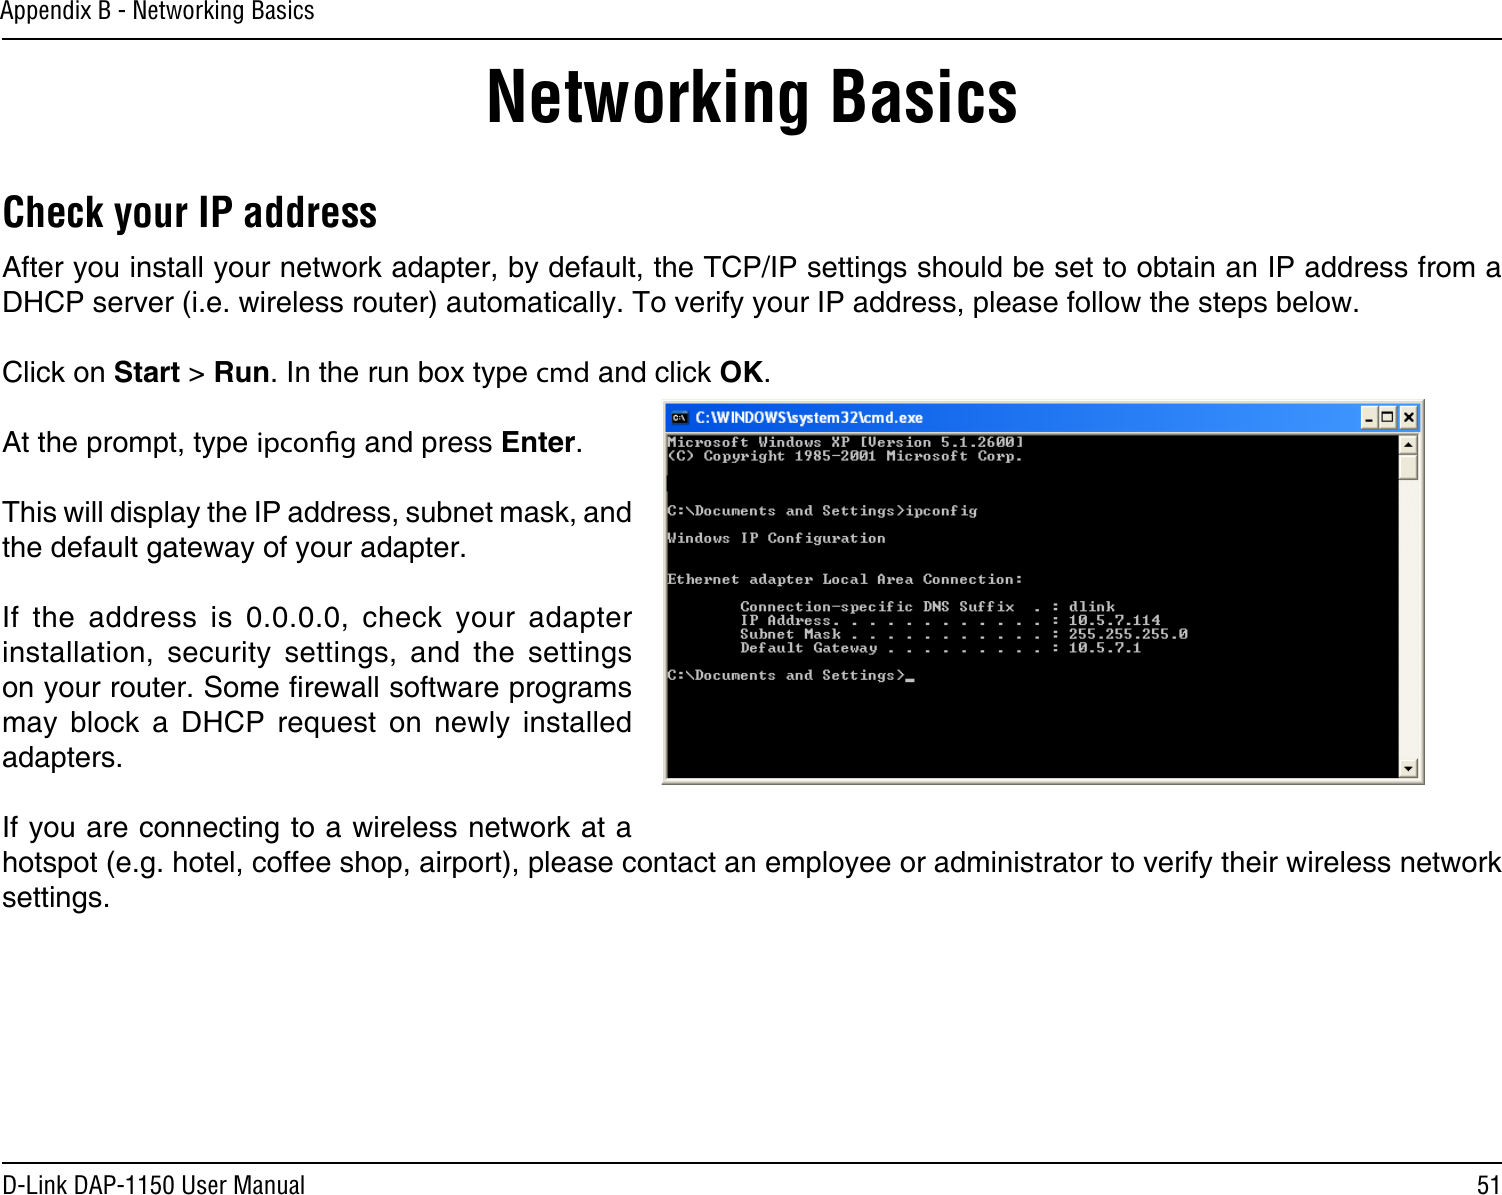 51D-Link DAP-1150 User ManualAppendix B - Networking BasicsNetworking BasicsCheck your IP addressAfter you install your network adapter, by default, the TCP/IP settings should be set to obtain an IP address from a DHCP server (i.e. wireless router) automatically. To verify your IP address, please follow the steps below.Click on Start &gt; Run. In the run box type cmd and click OK.At the prompt, type ipcong and press Enter.This will display the IP address, subnet mask, and the default gateway of your adapter.If  the  address  is  0.0.0.0,  check  your  adapter installation,  security  settings,  and  the  settings on your router. Some rewall software programs may  block  a  DHCP  request  on  newly  installed adapters. If you are connecting to a wireless network at a hotspot (e.g. hotel, coffee shop, airport), please contact an employee or administrator to verify their wireless network settings.